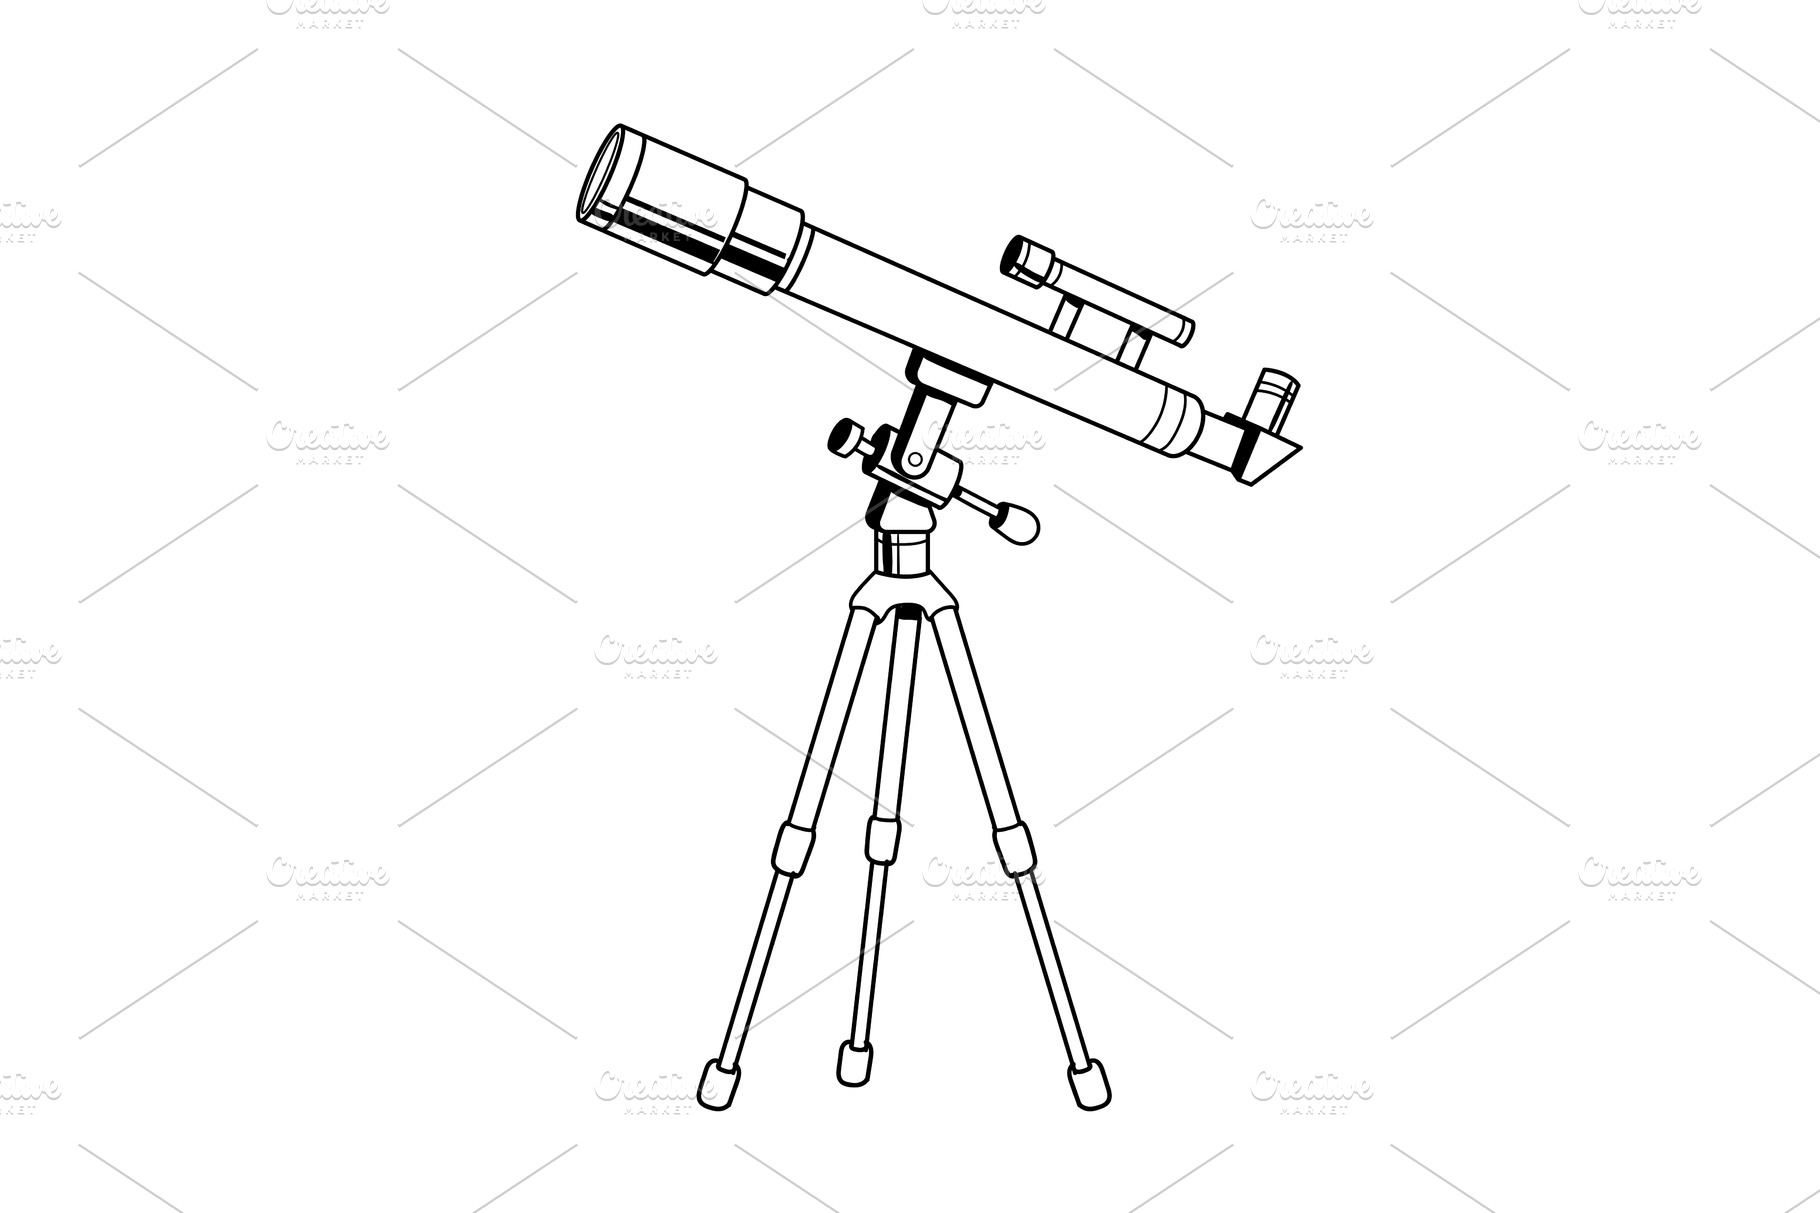 Download Telescope object coloring book vector ~ Graphic Objects ~ Creative Market